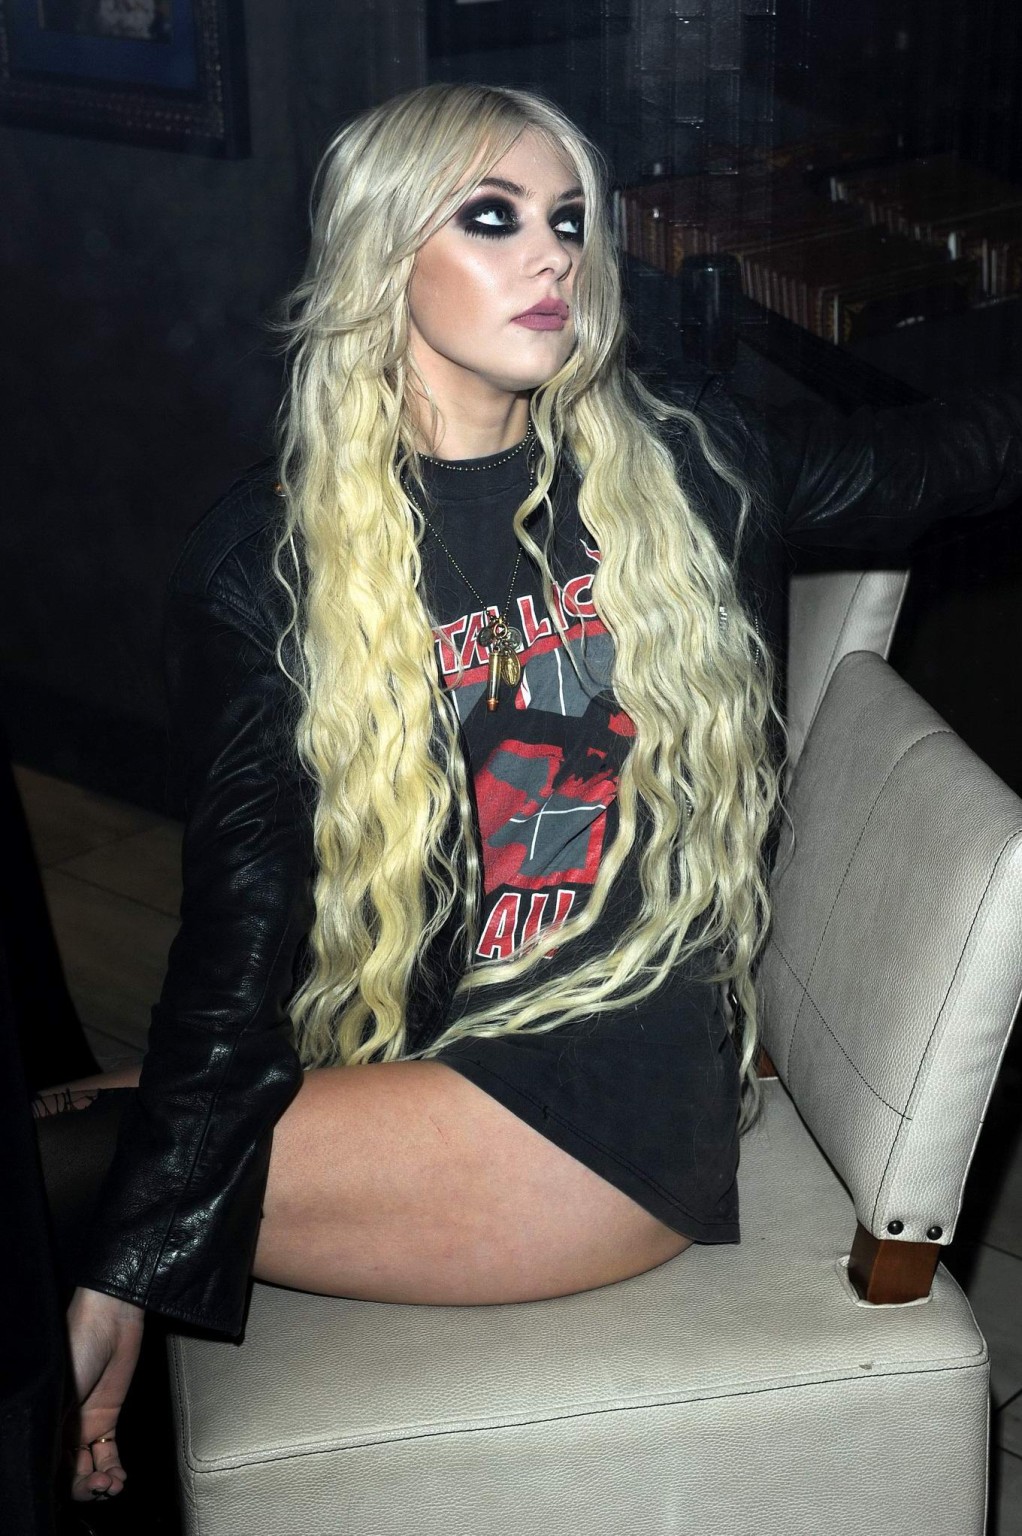 Taylor momsen upskirt mentre si esibisce a Hollywood
 #75307043